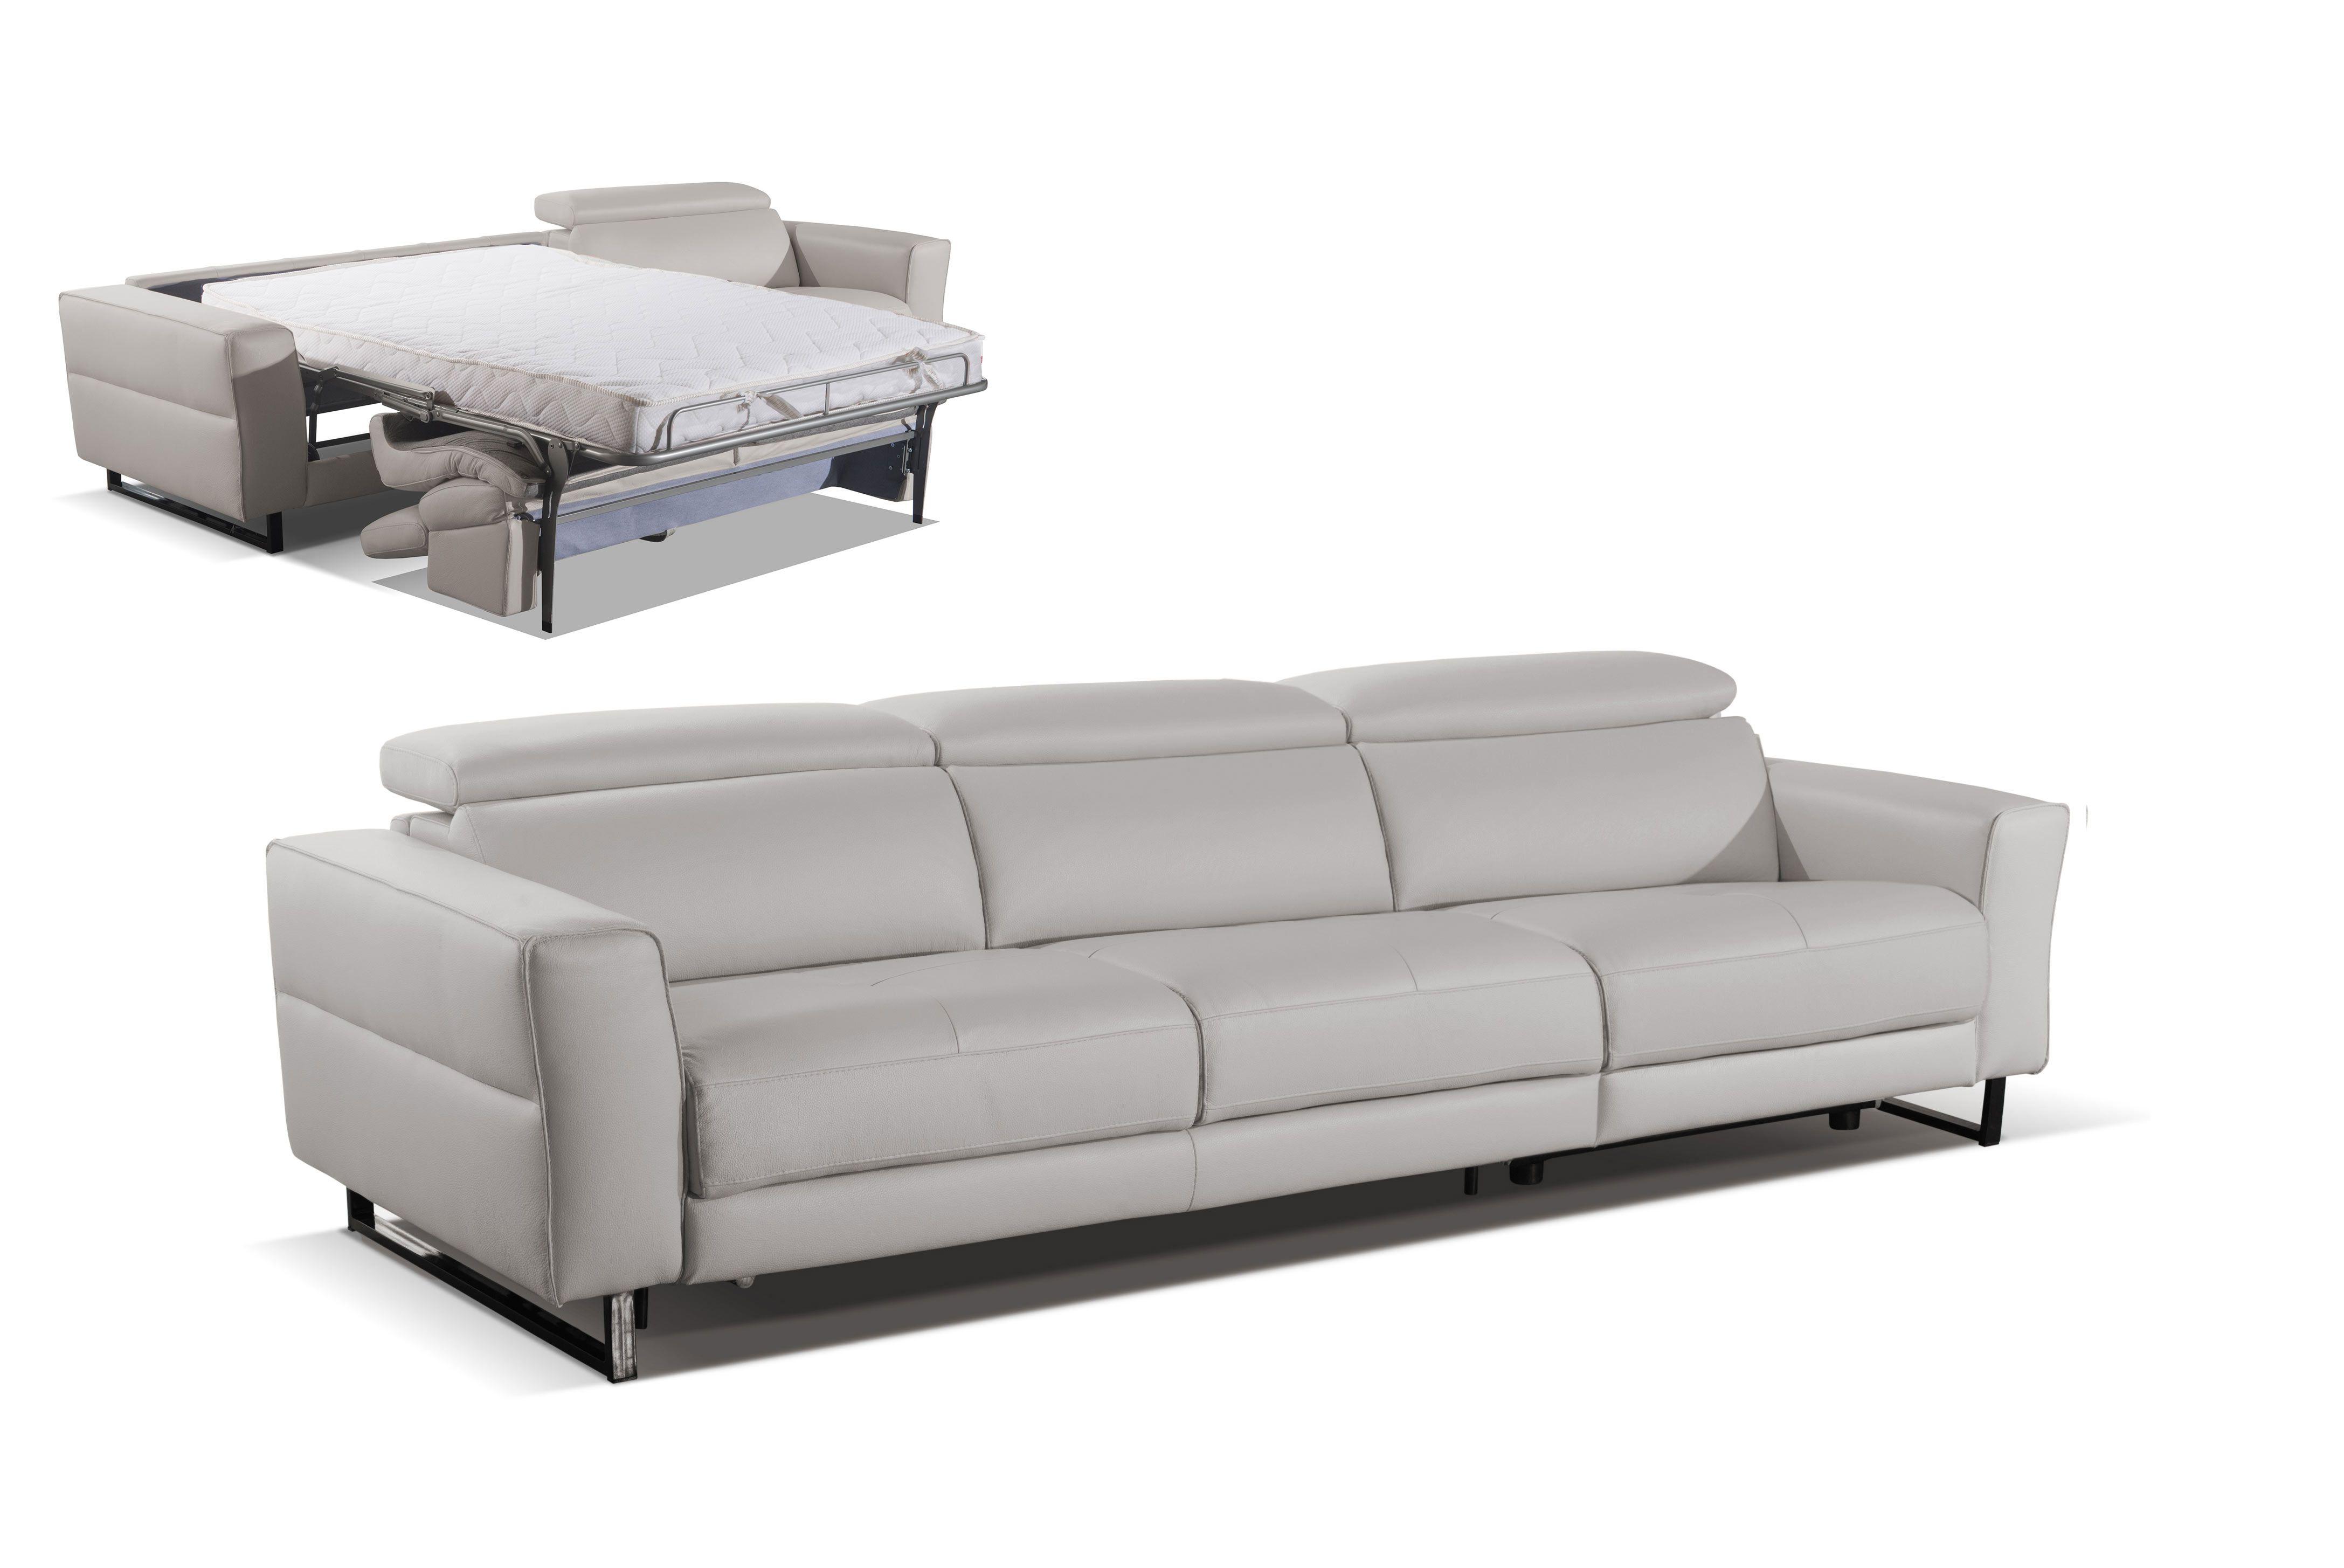 Contemporary, Modern Sofa bed VGDDSNOOKER VGDDSNOOKER in White, Gray Italian Leather